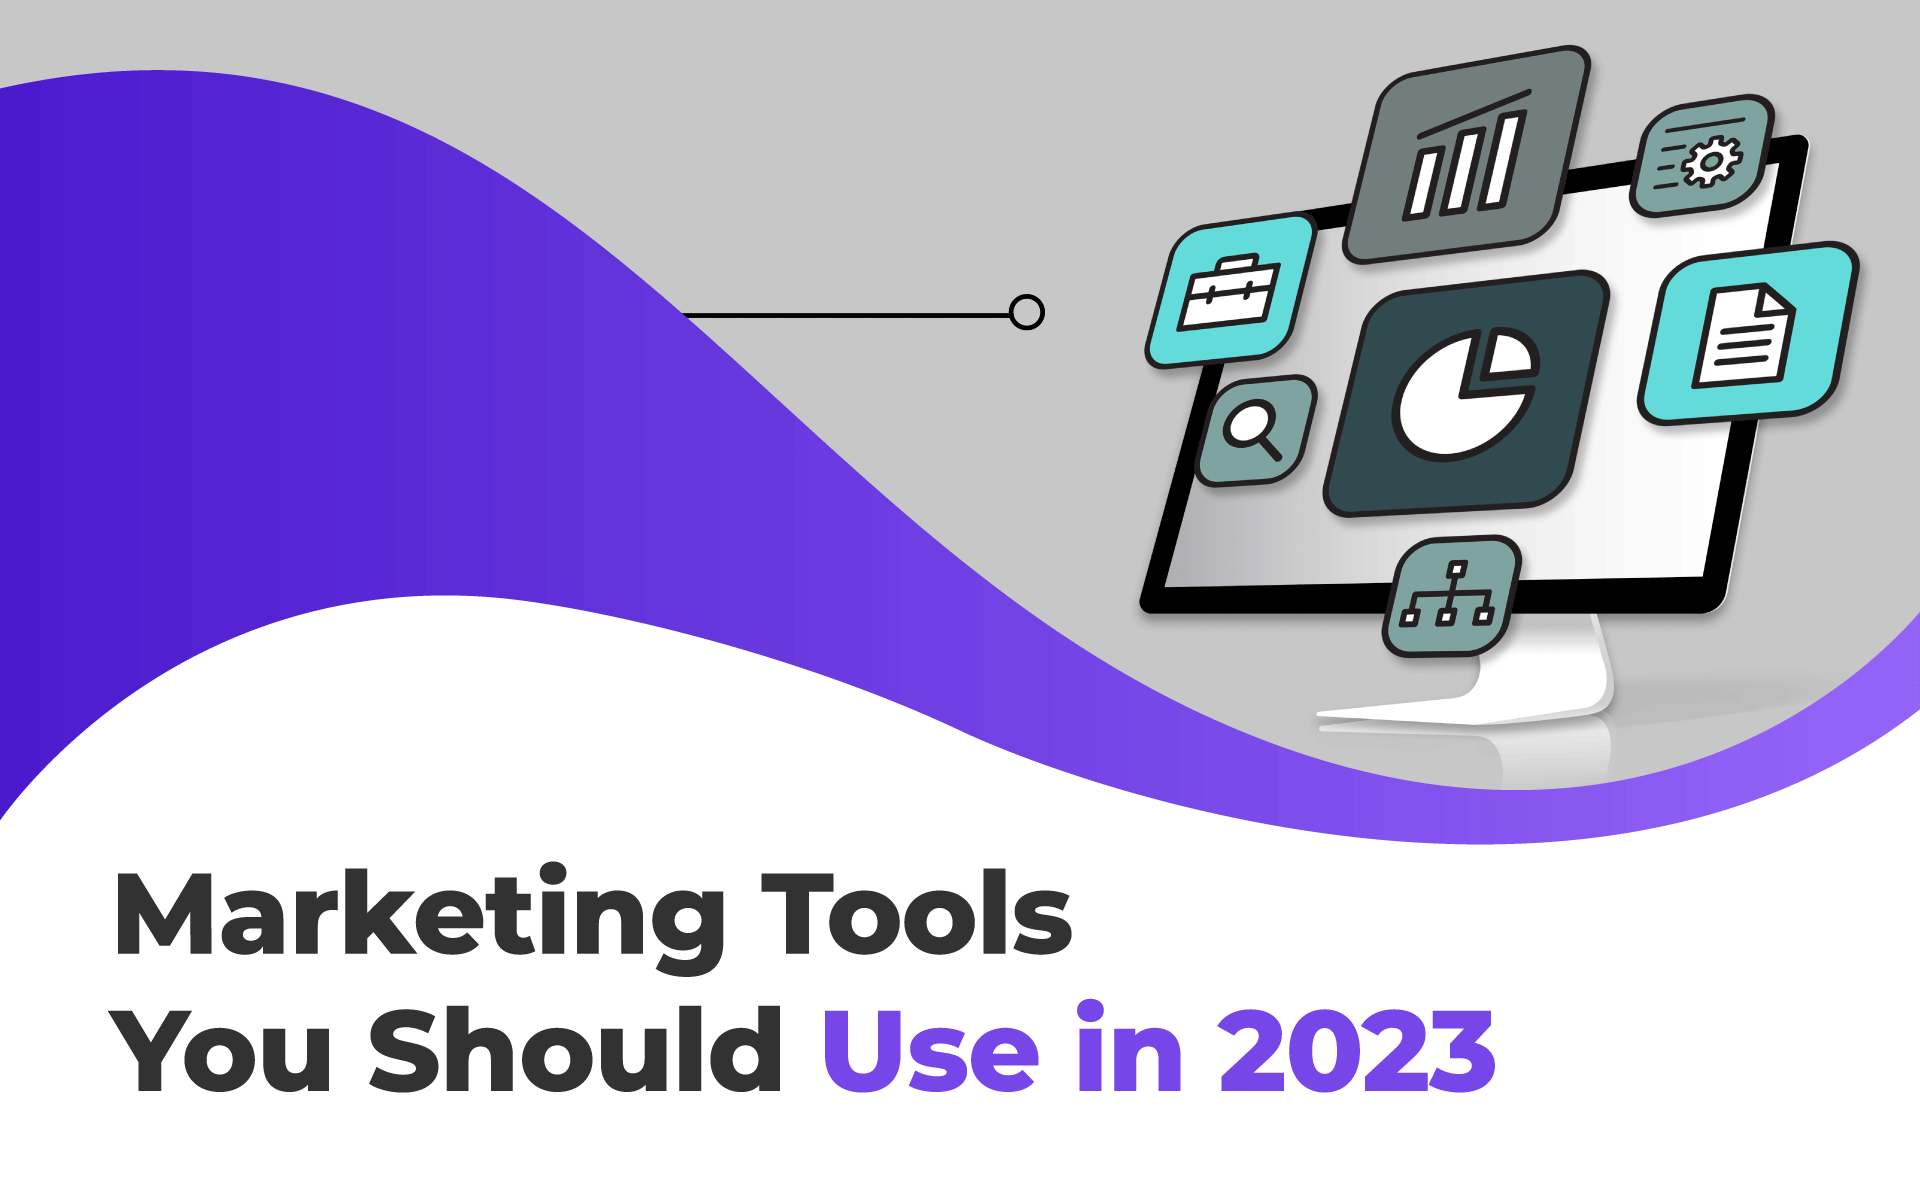 Marketing Tools You Should Use in 2023